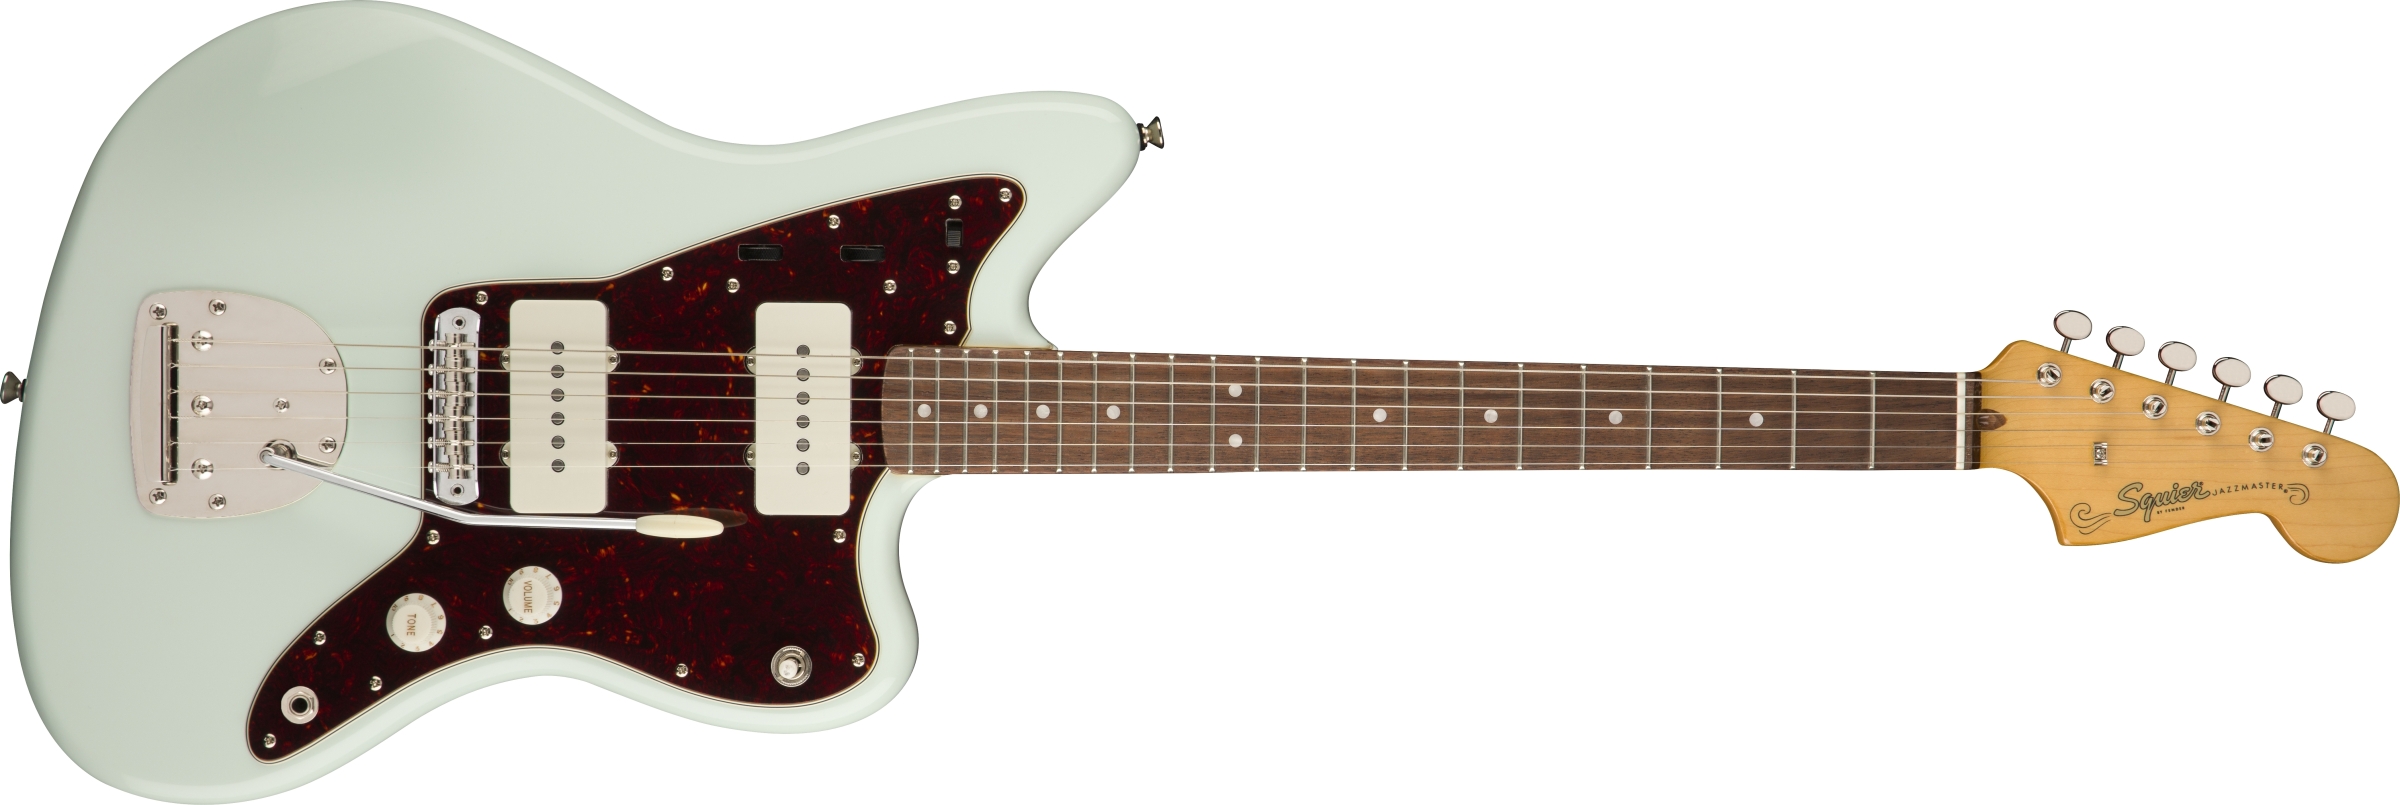 Squier Classic Vibe 60s Jazzmaster Electric Guitar on a white background